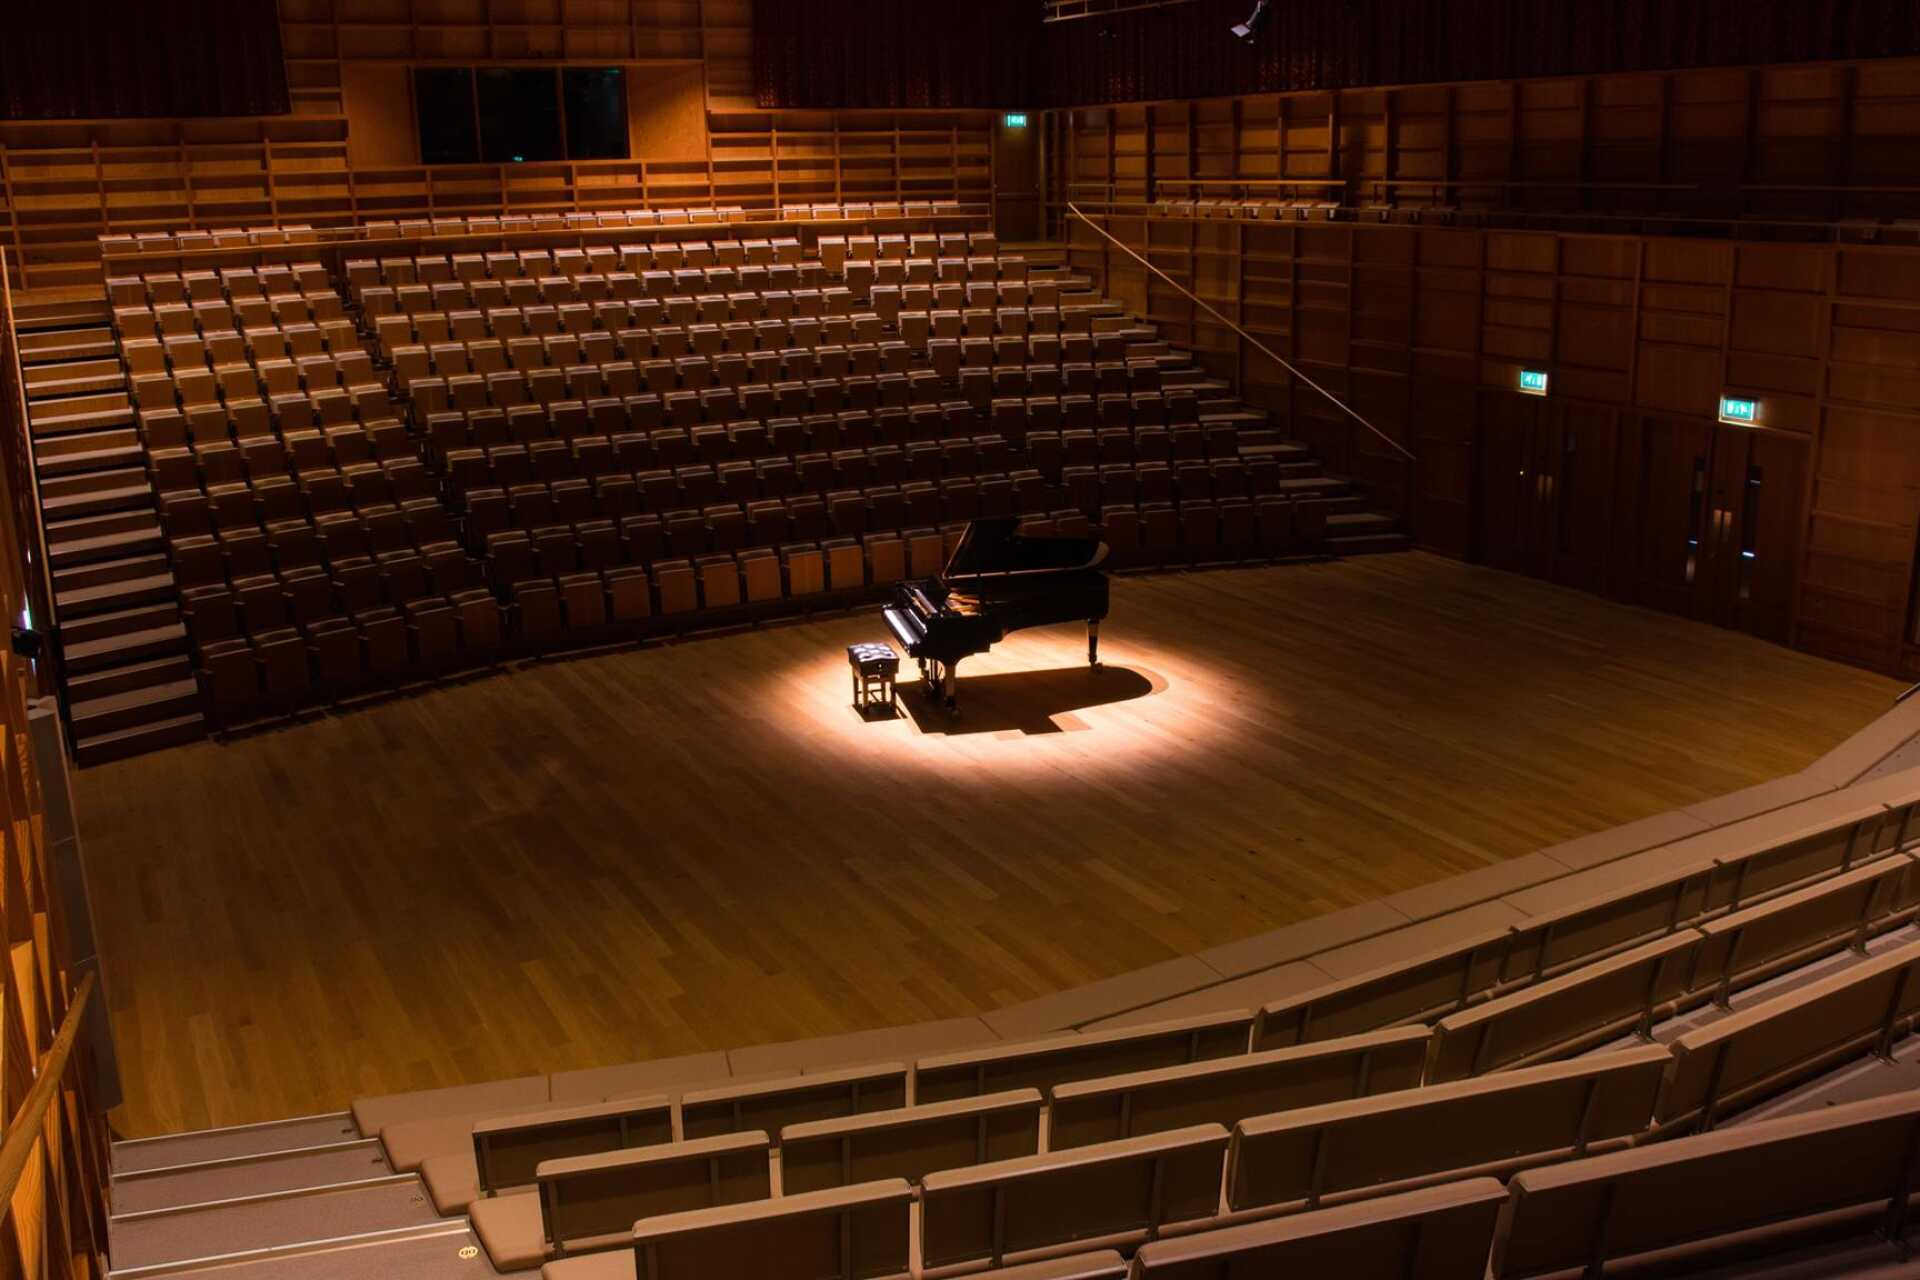 A spotlit piano and stool in the Colyer-Fergusson building